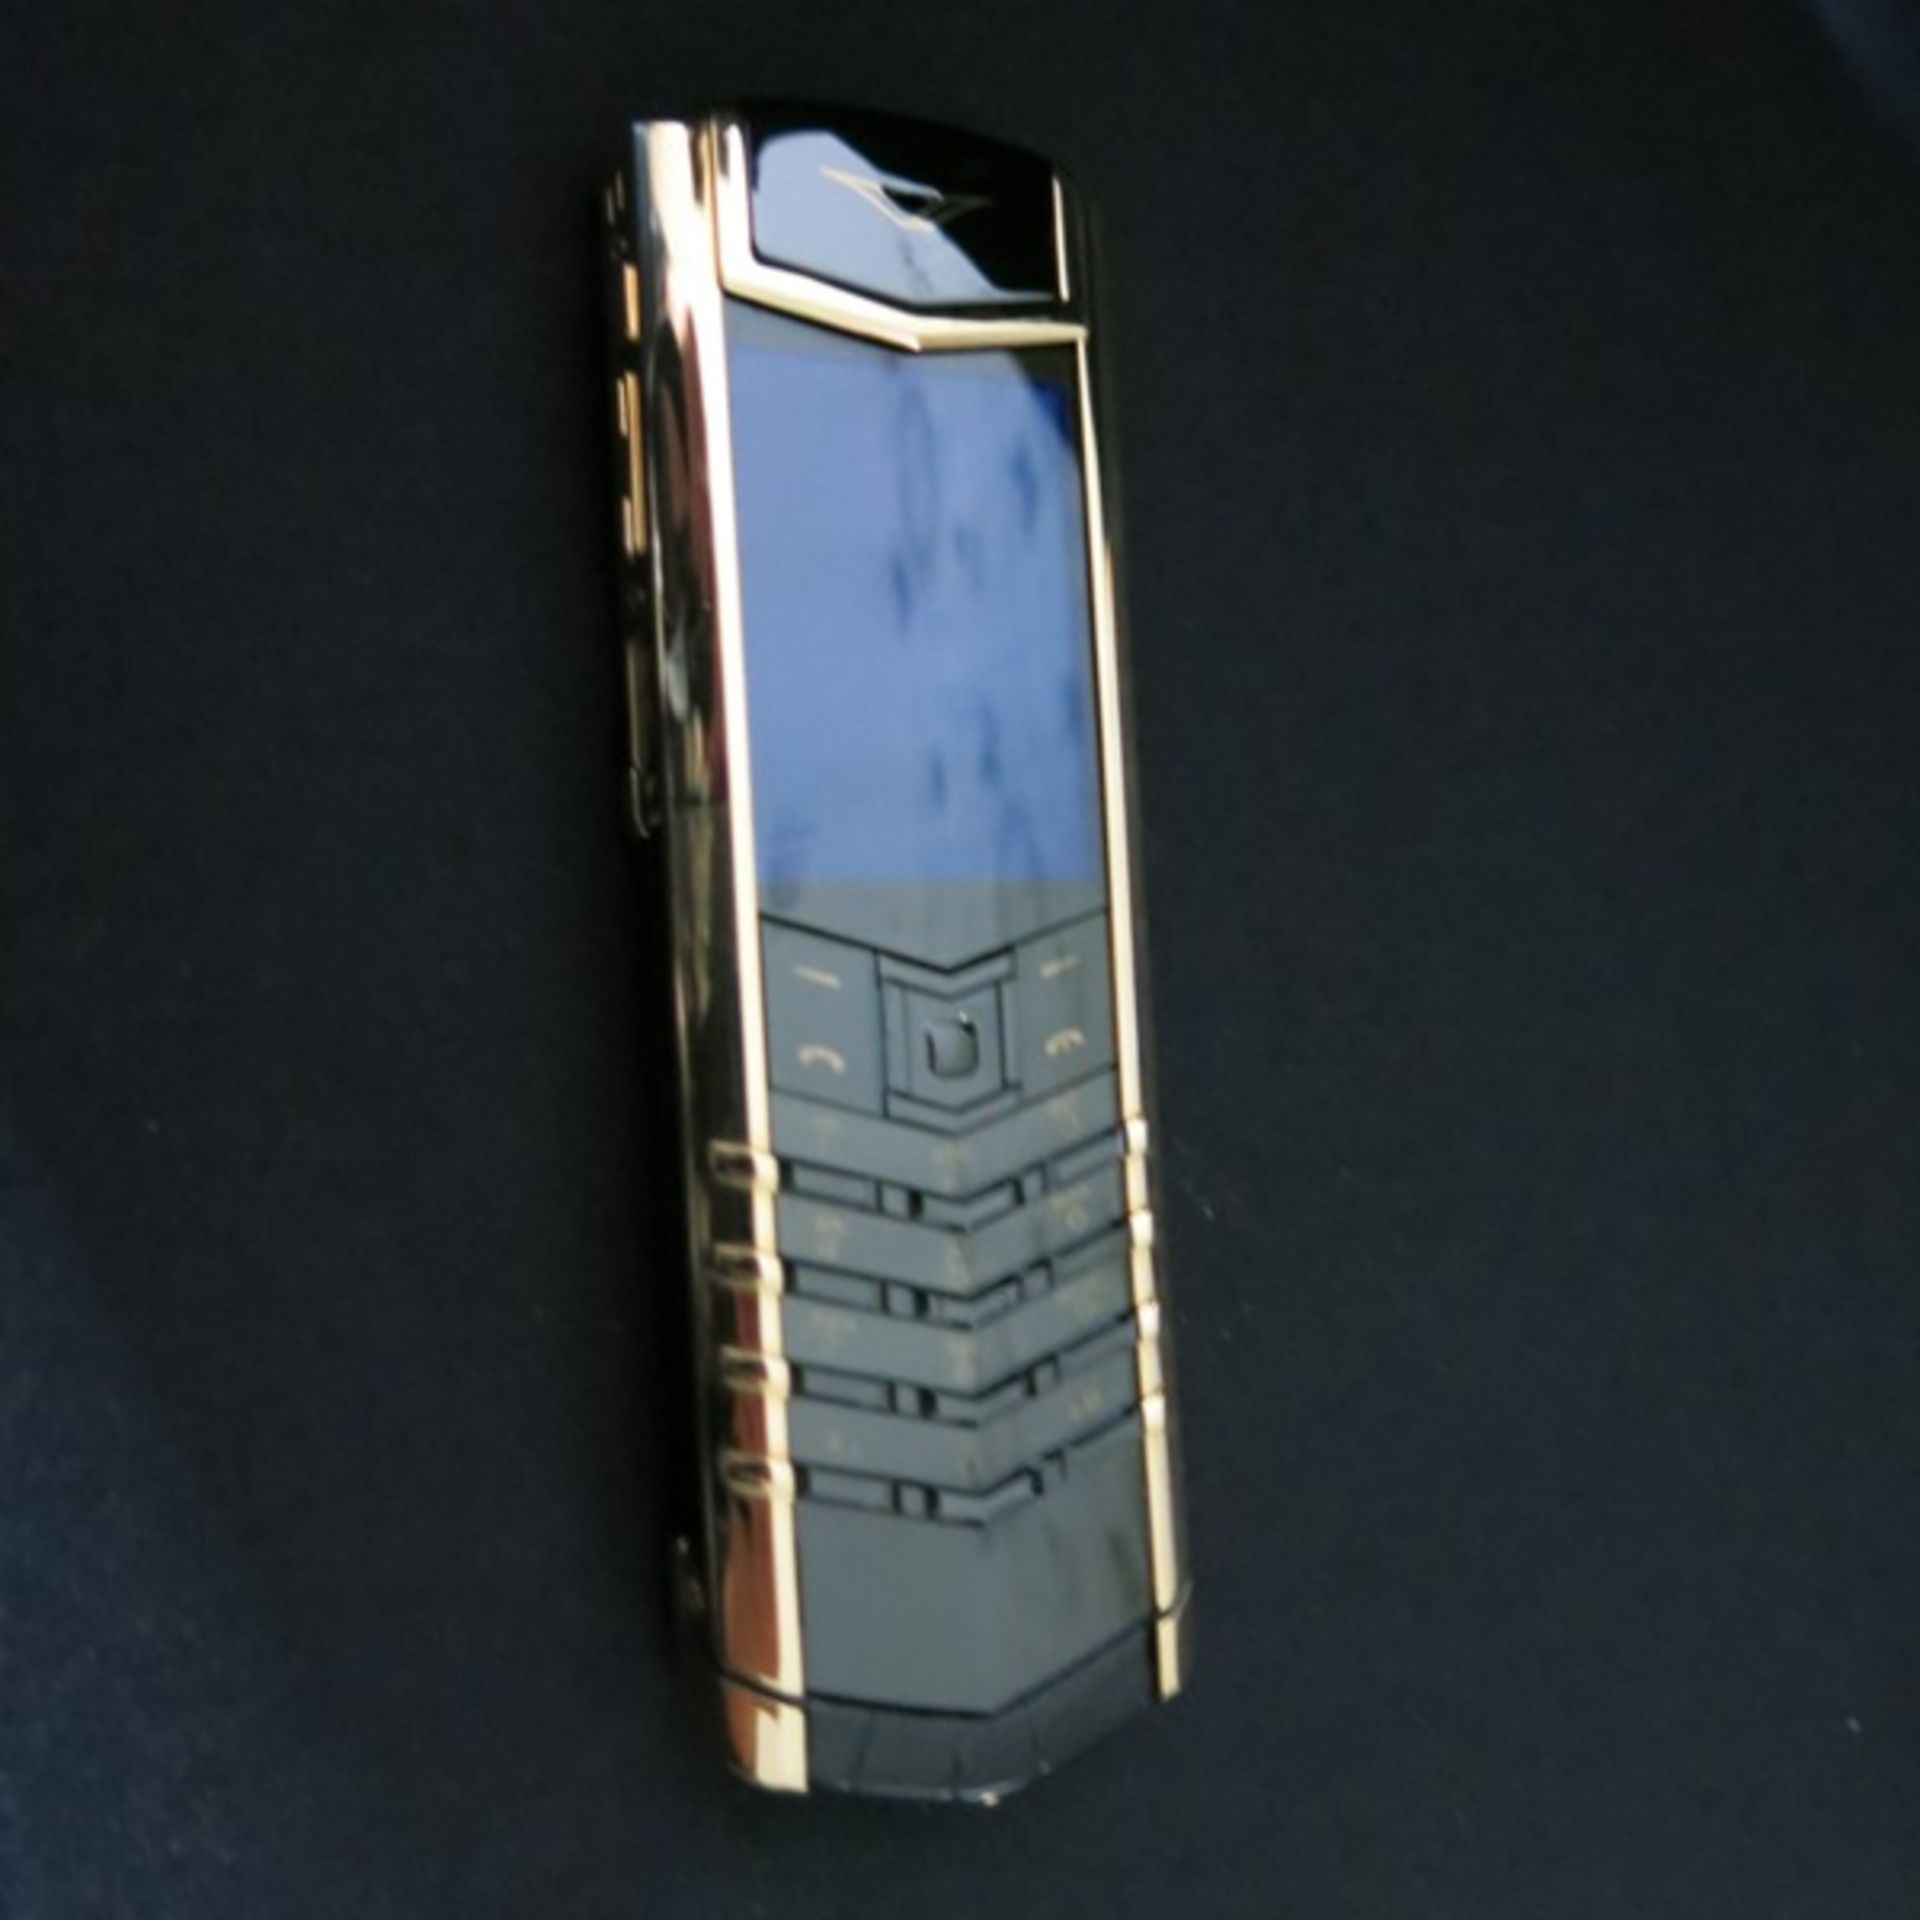 Vertu 18kt Yellow Gold Signature S Phone. Furnished with Black Alligator Leather, Ceramic Pillow,